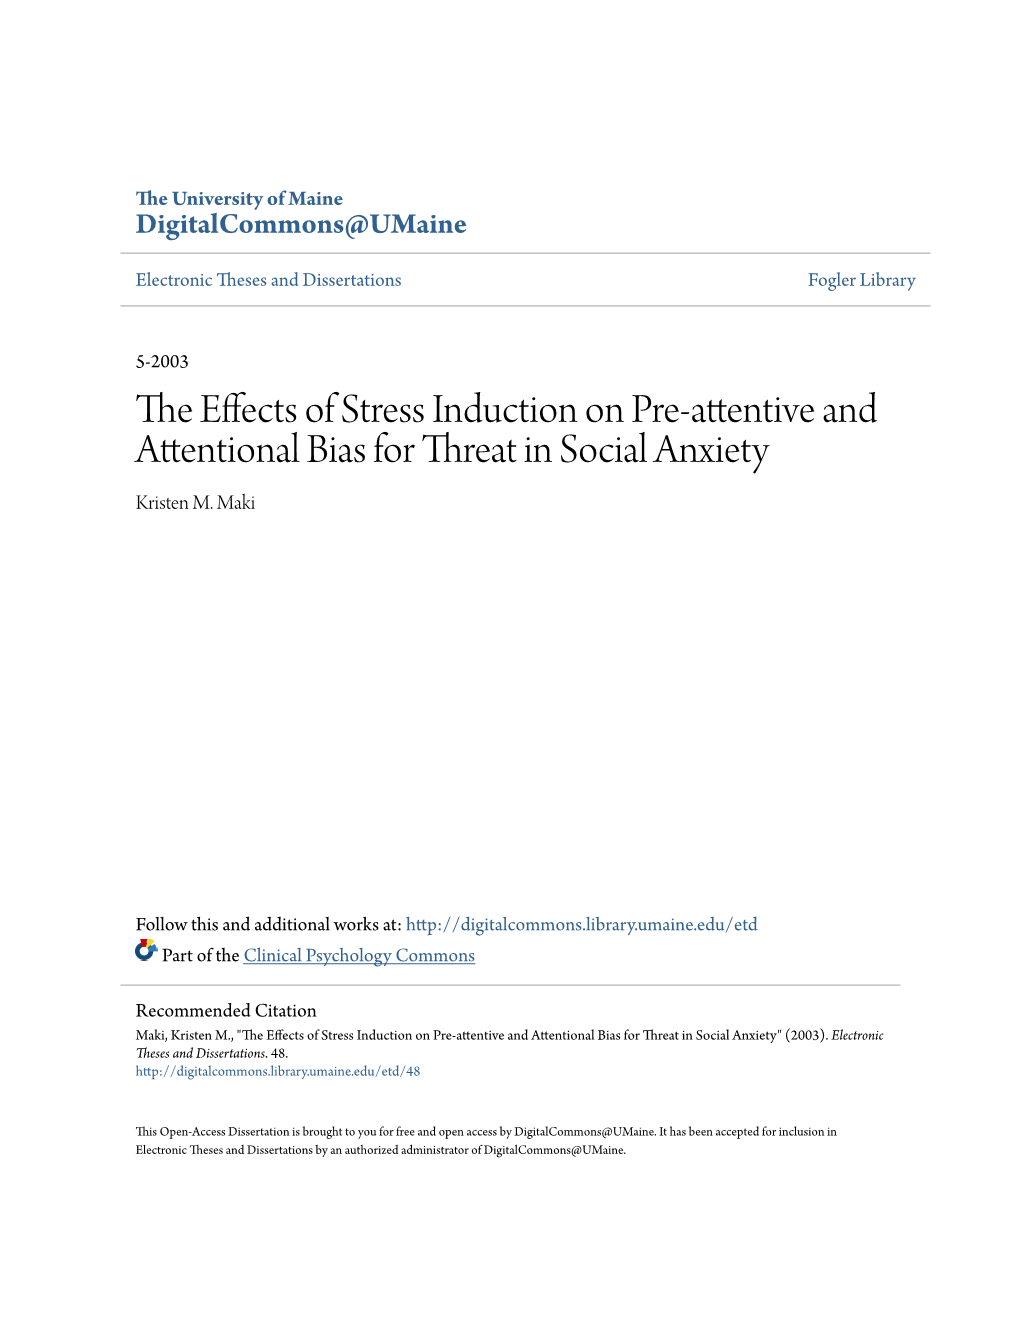 The Effects of Stress Induction on Pre-Attentive and Attentional Bias for Threat in Social Anxiety" (2003)